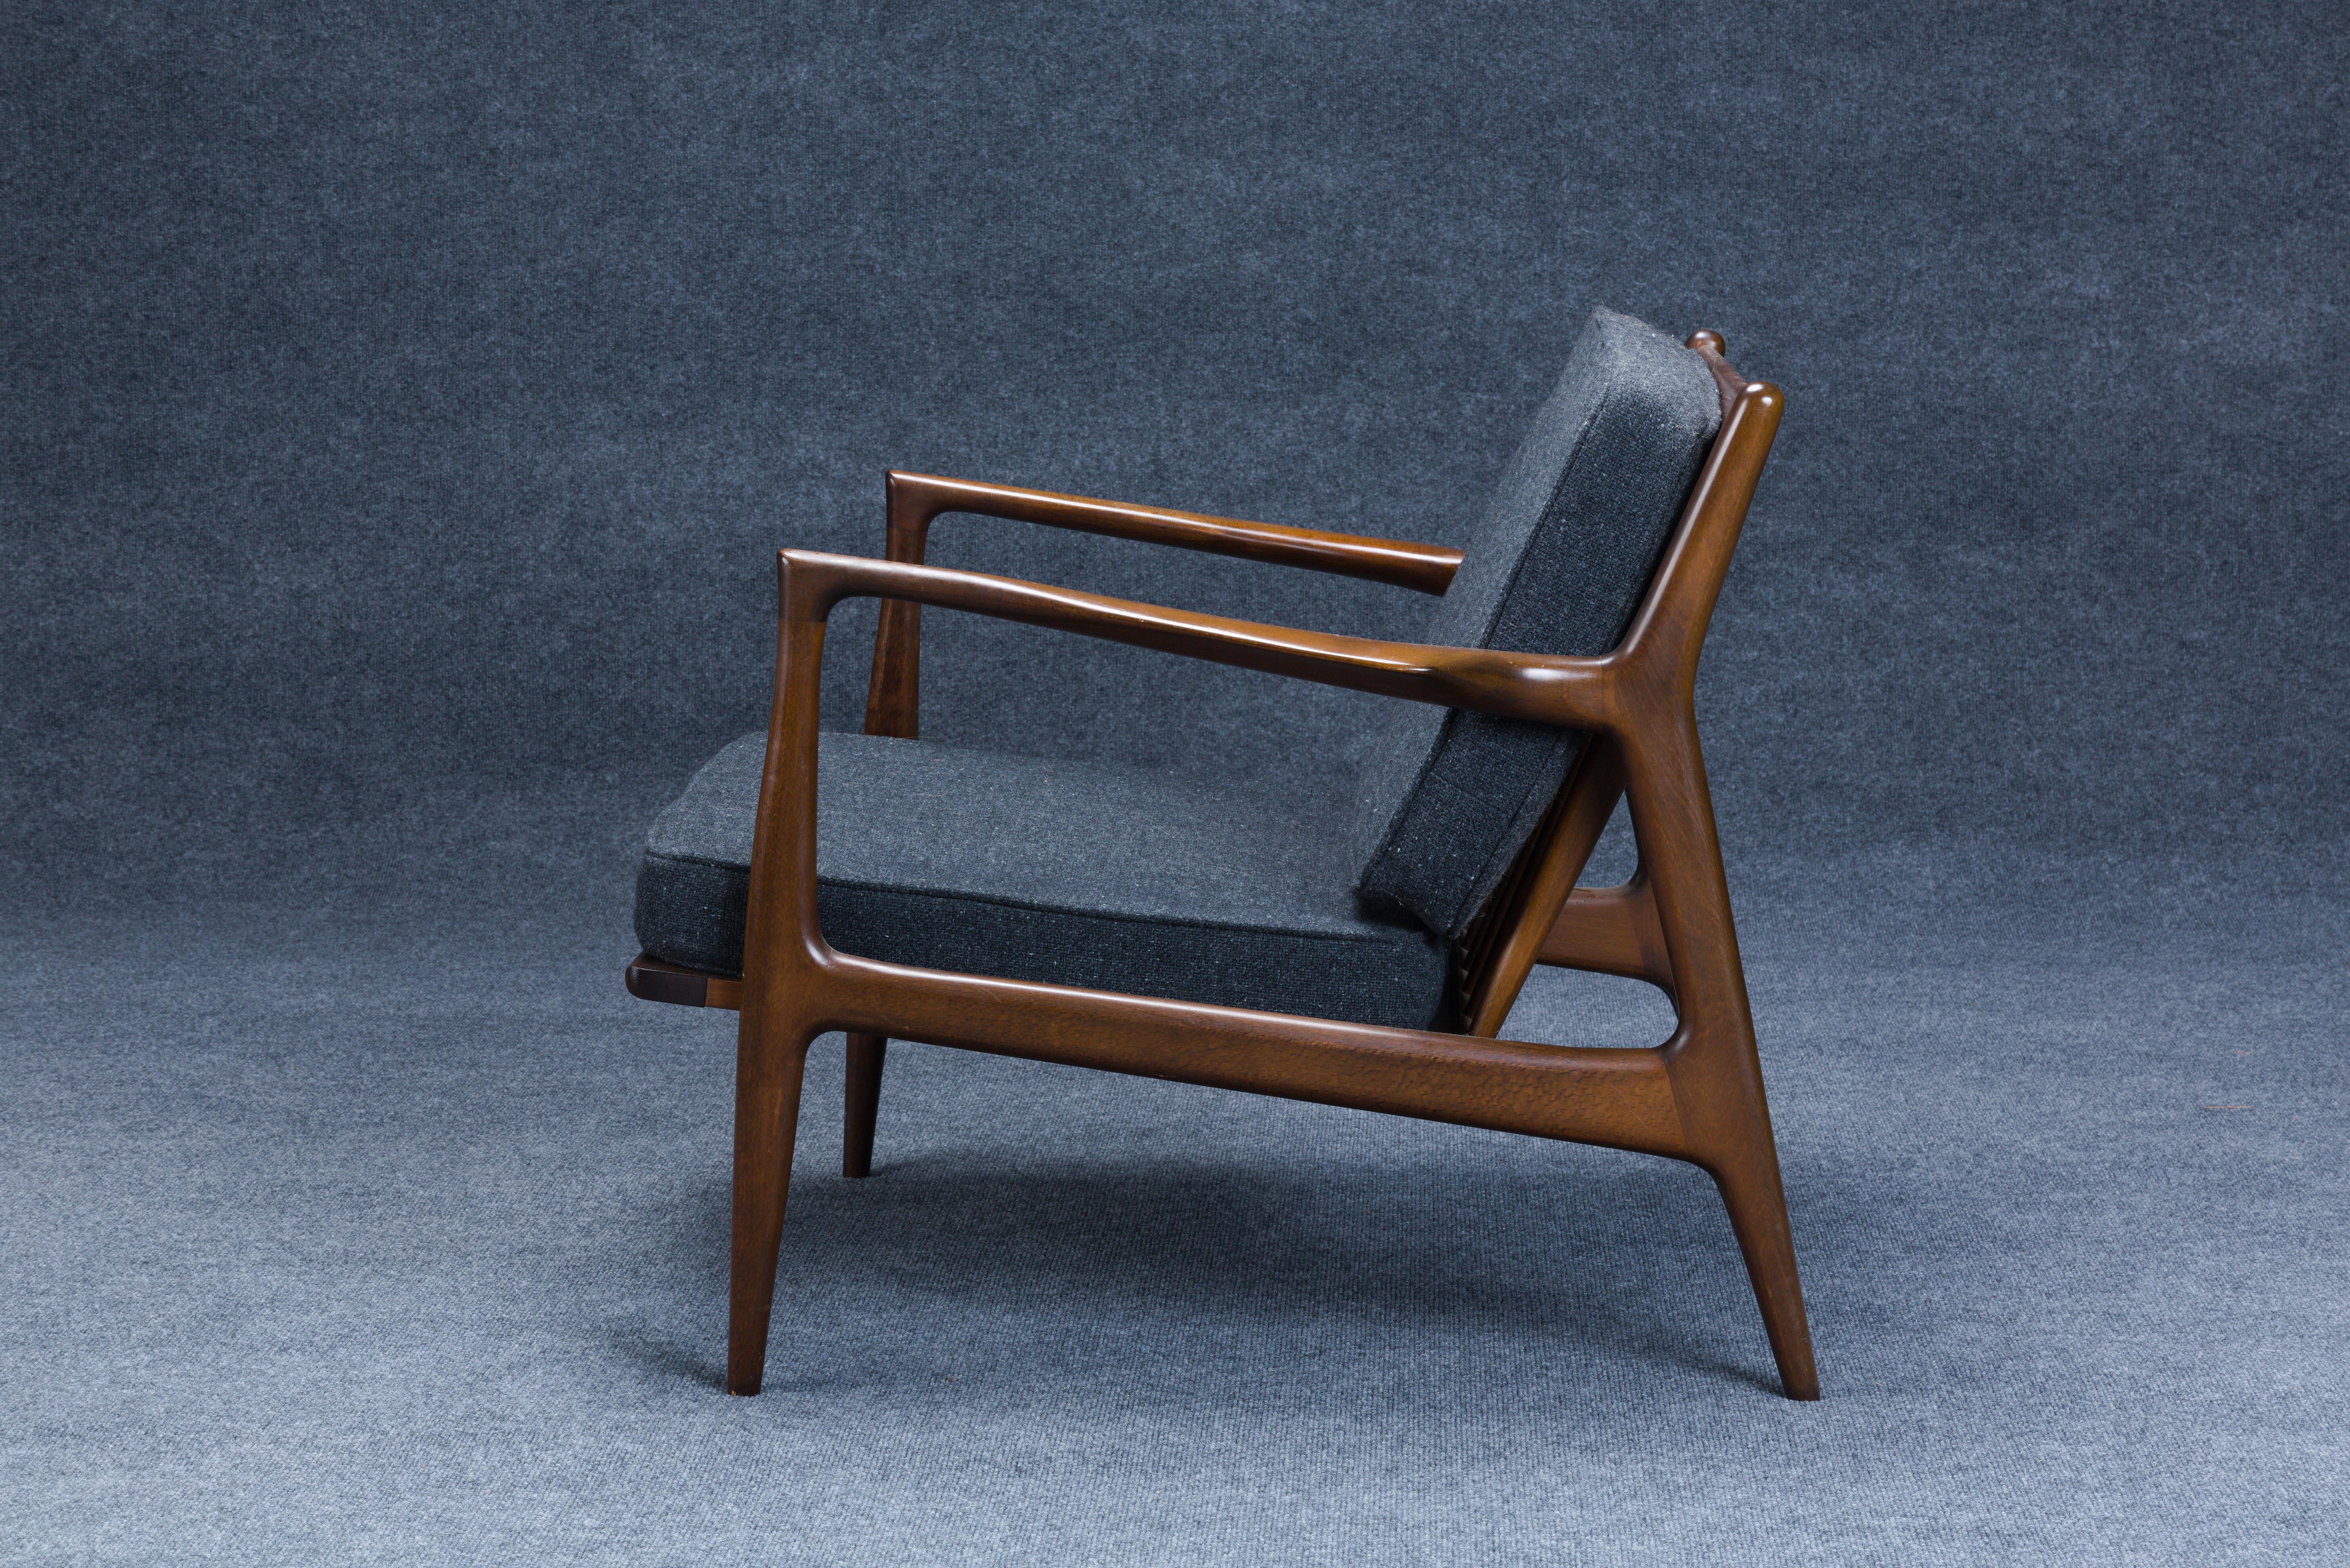 Two Ib Kofod-Larsen (Danish, 1921-2003) for Selig Spear Lounge Chairs, Denmark, c. 1960, walnut, brass, steel, each with round Selig tag, ht. 26 1/2, wd. 30, dp. 30 in.